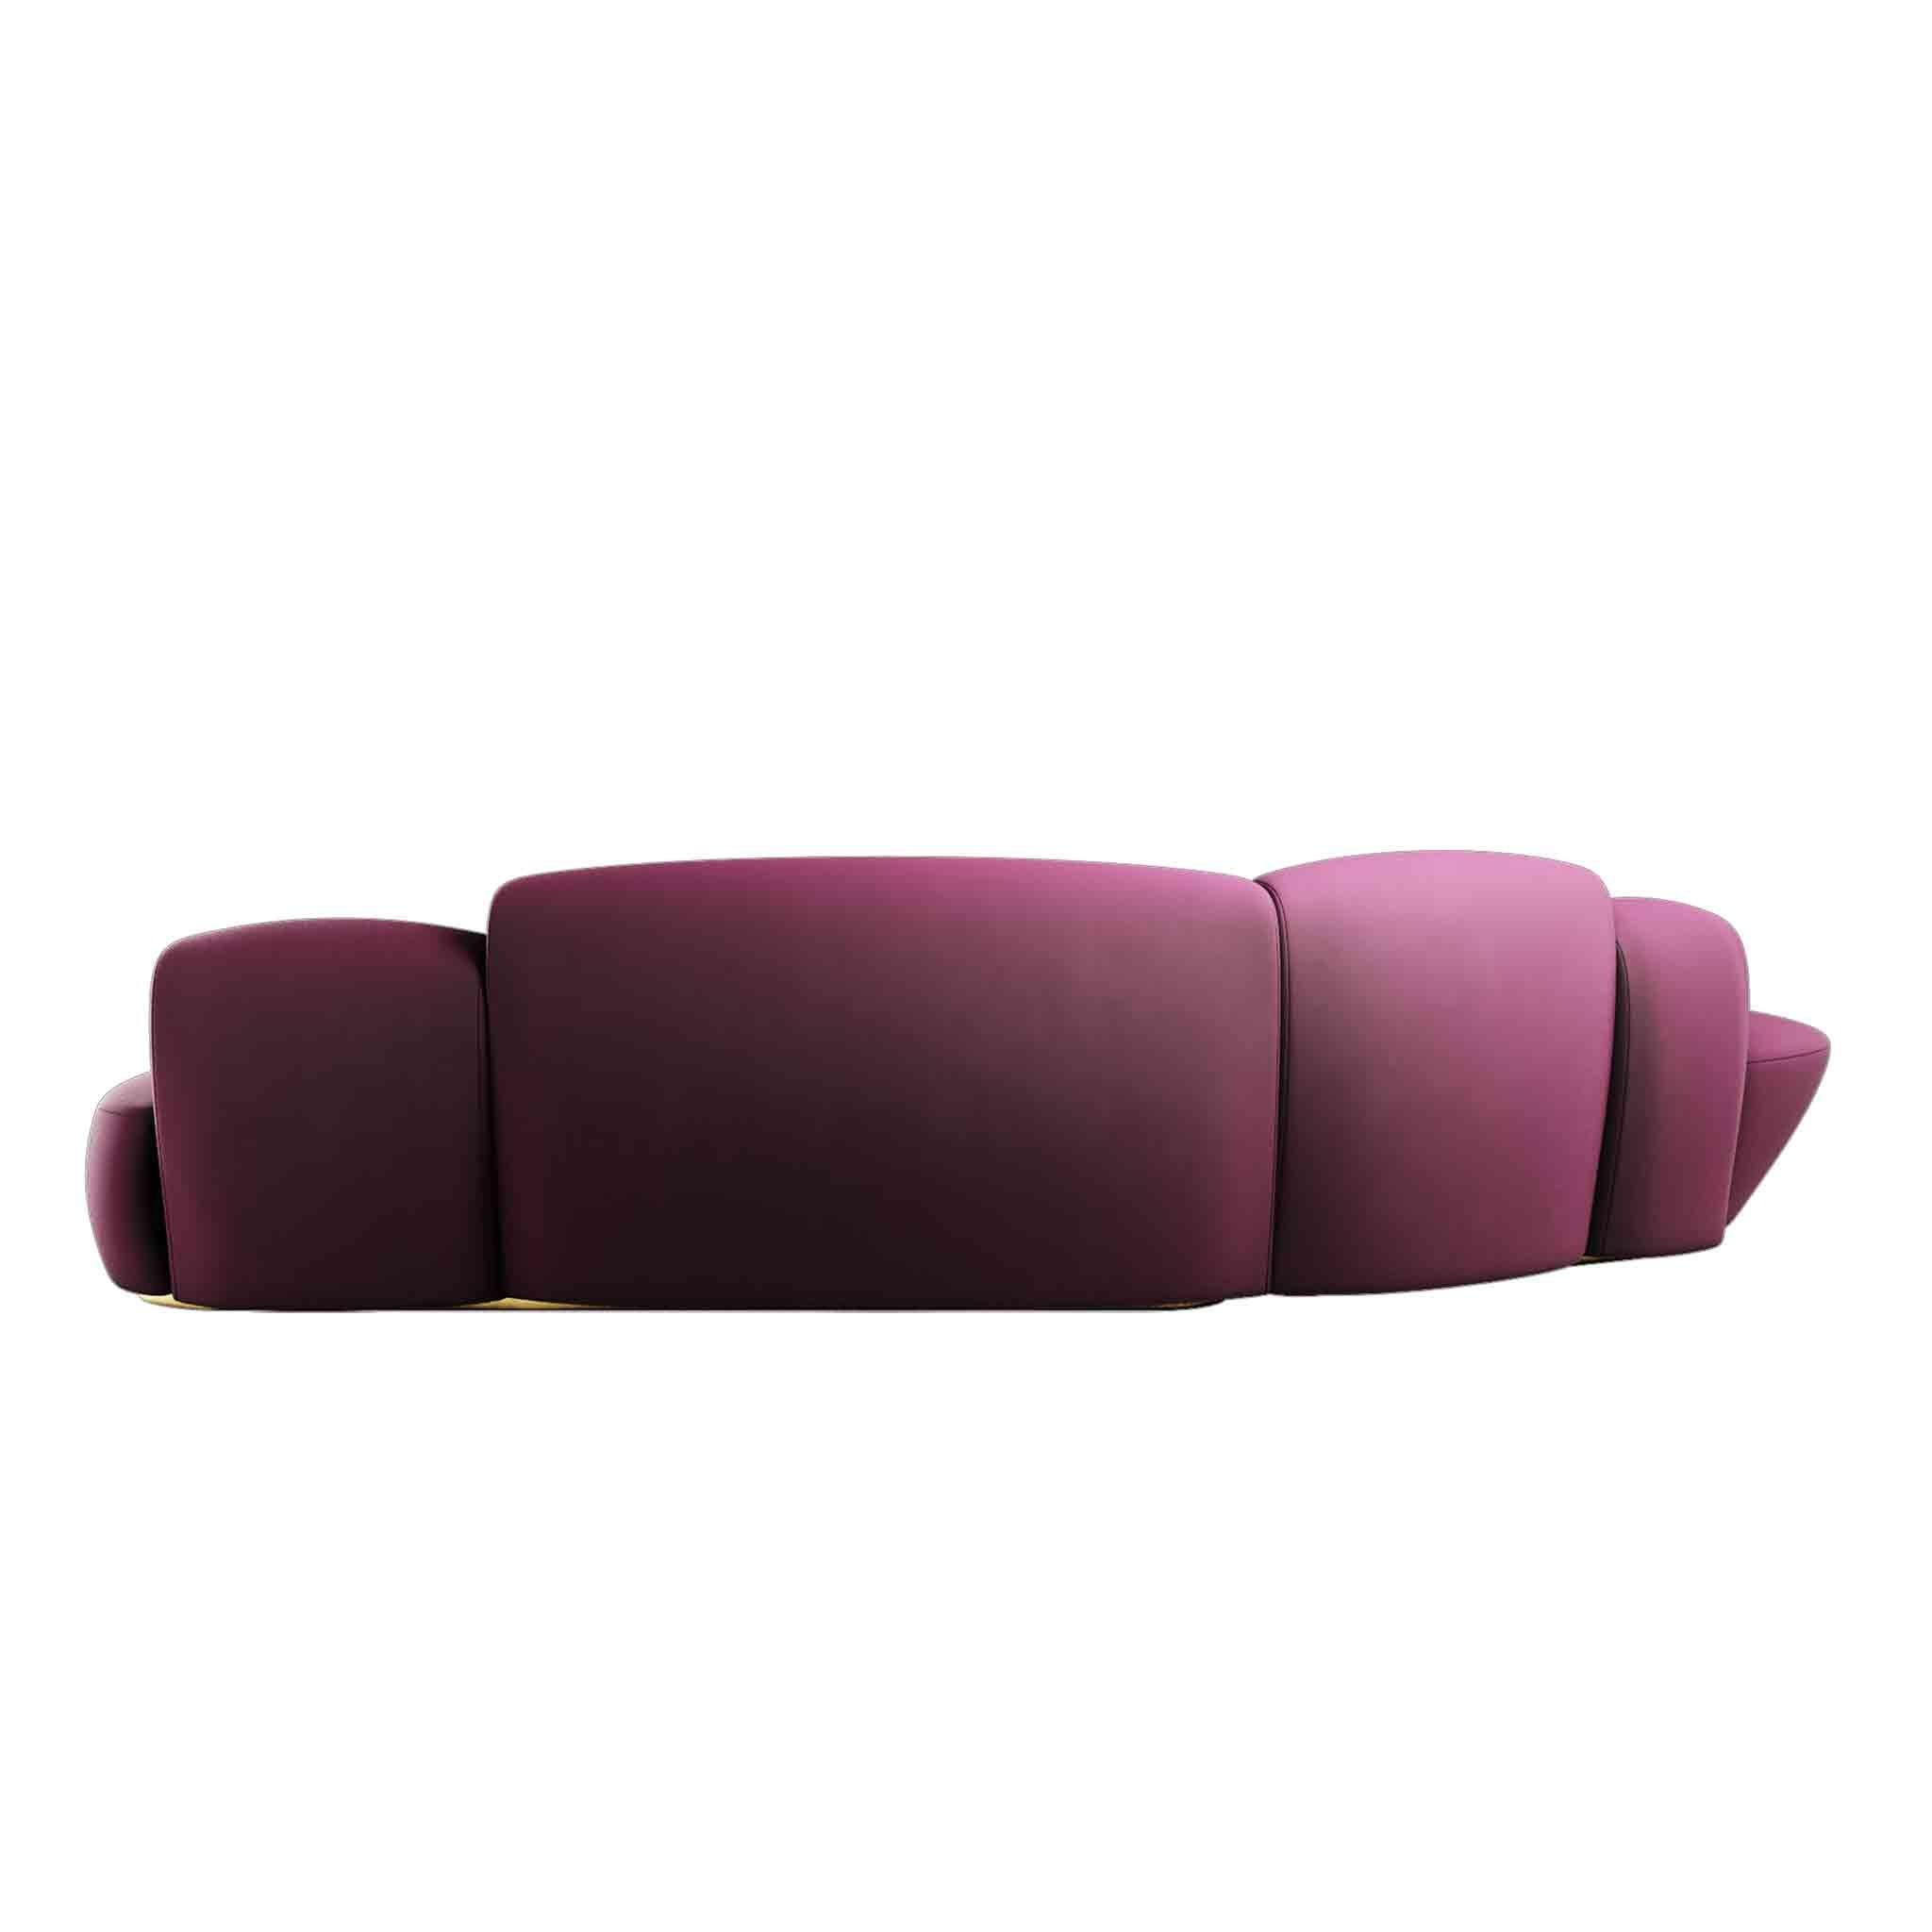 Portuguese 21st Century Modern Curved Sofa with Chaise Longue in Dark Red Velvet  For Sale